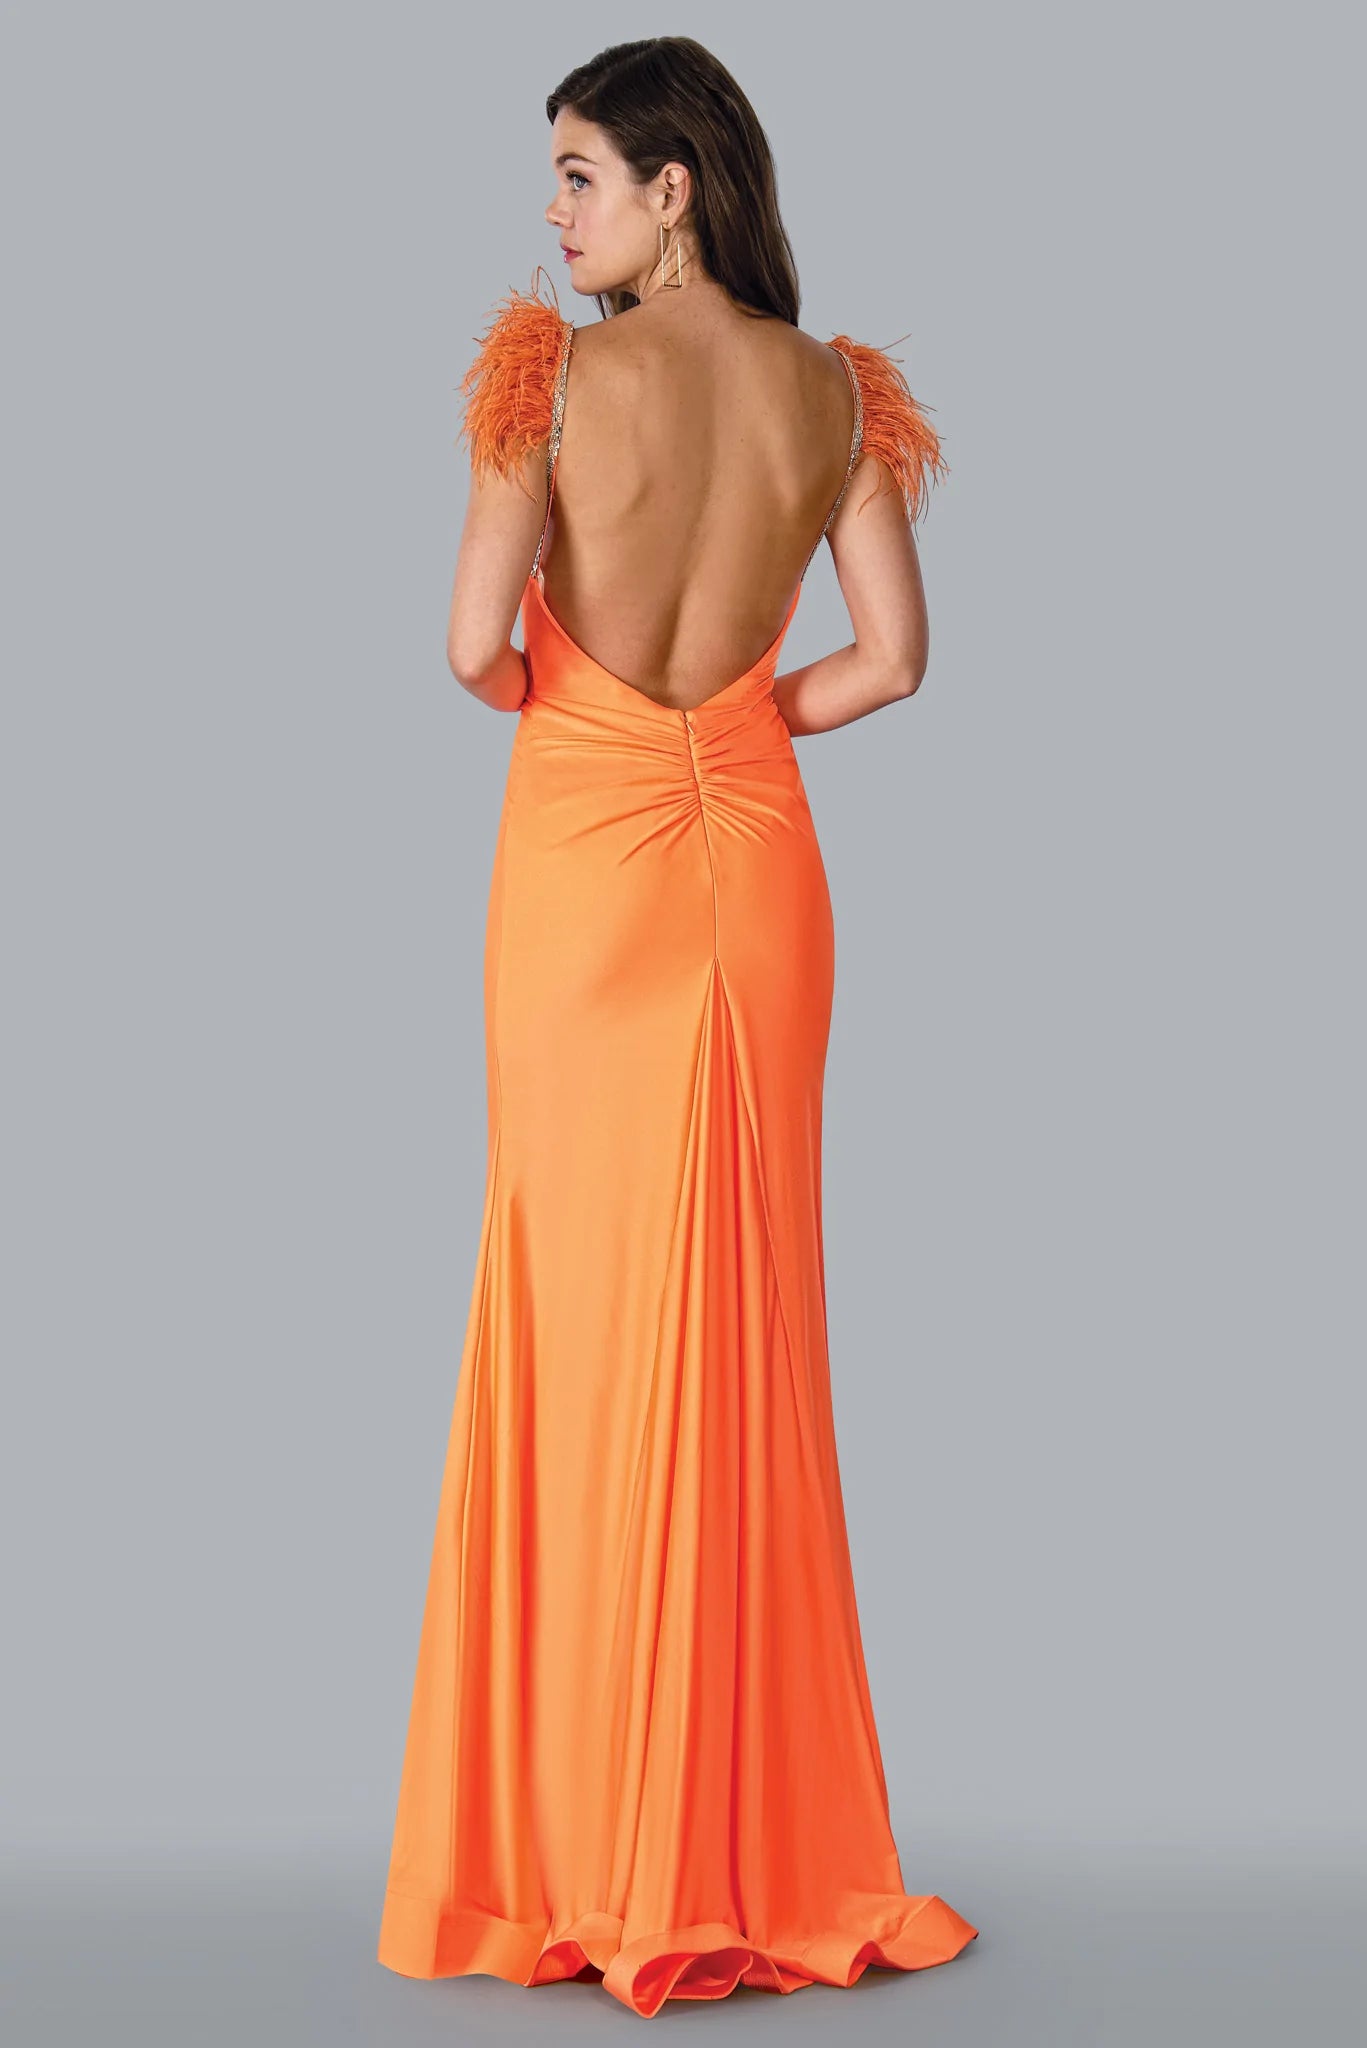 Orange Prom Dresses For Black Girls 2023 Luxury Mermaid Style Sequin High  Neck Long Sleeve Formal Evening Gala Gowns For Color champagne US Size 18W